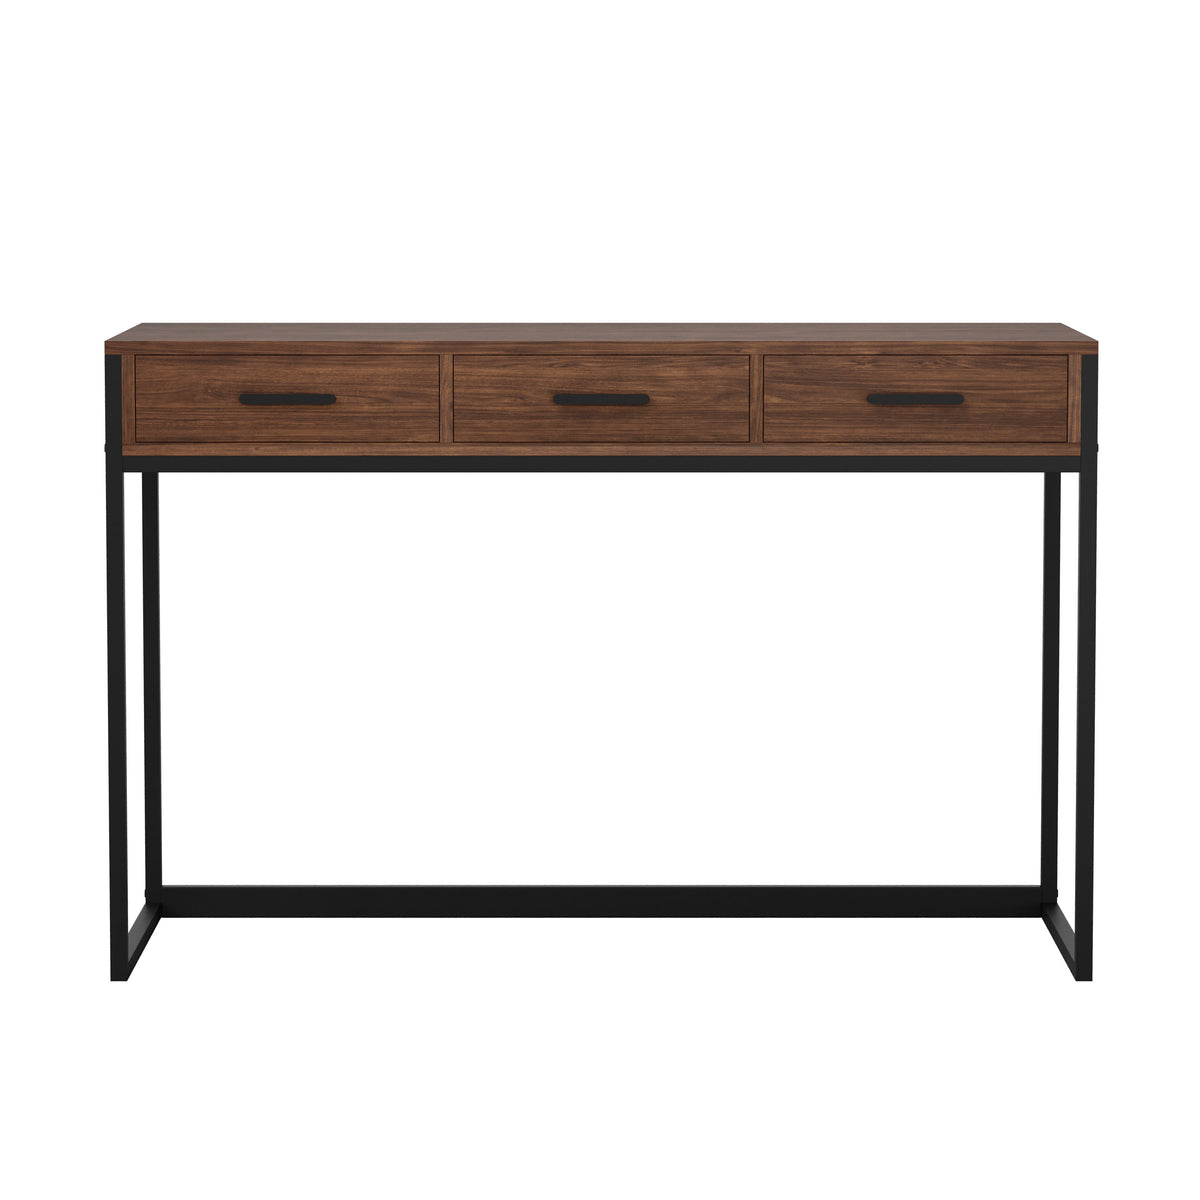 Walnut Top/Oil Rubbed Bronze Frame |#| Walnut 3 Drawer Home Office Desk with Oil Rubbed Bronze Metal Frame and Hardware